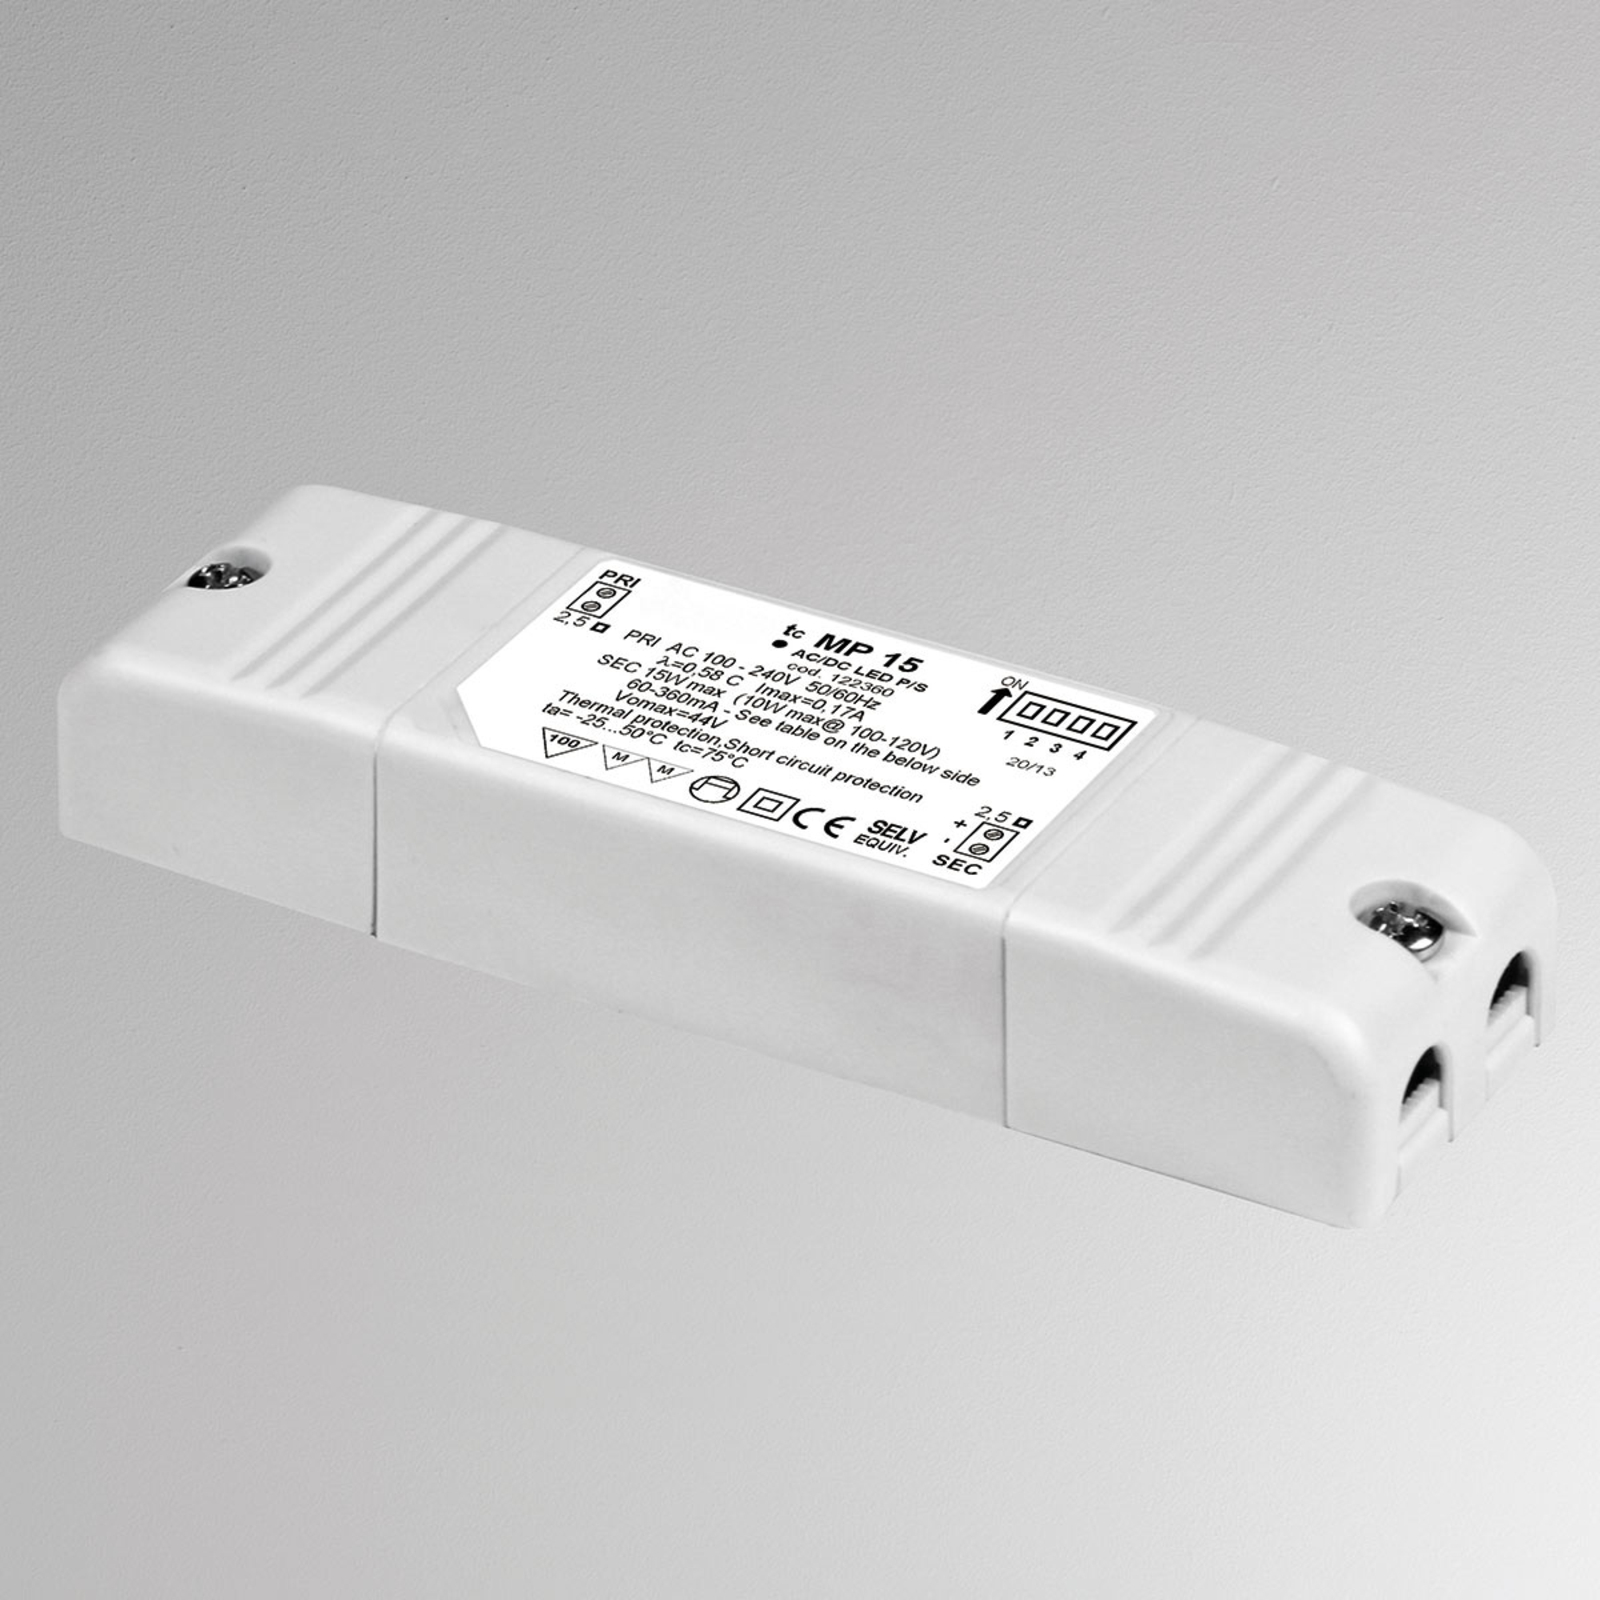 LED converter MP15, adjustable, not dimmable